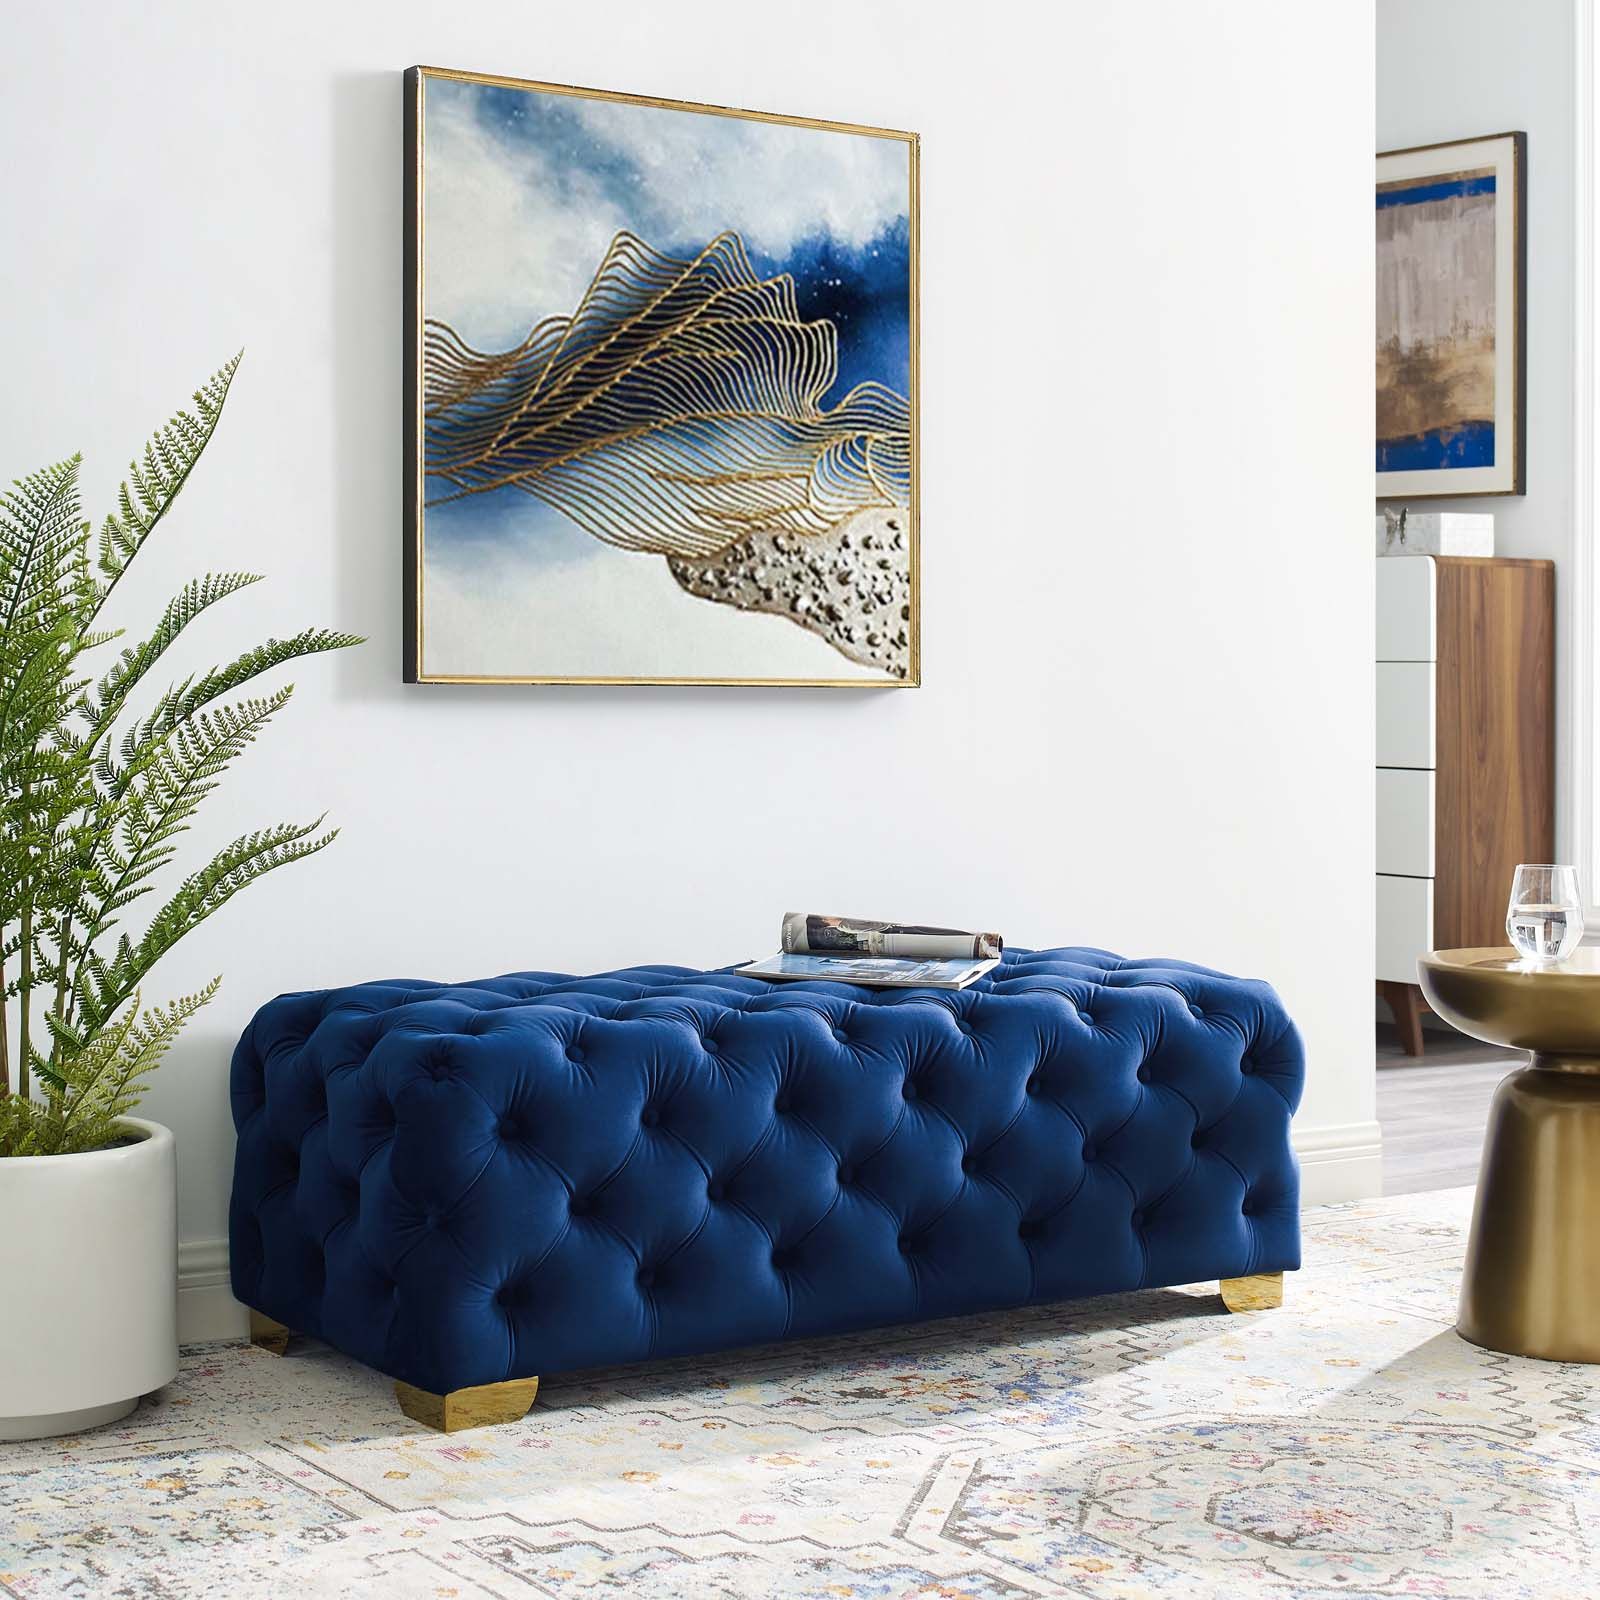 Sensible Button Tufted Performance Velvet Bench Navy Inside Fashionable Navy Velvet Fabric Benches (View 4 of 10)